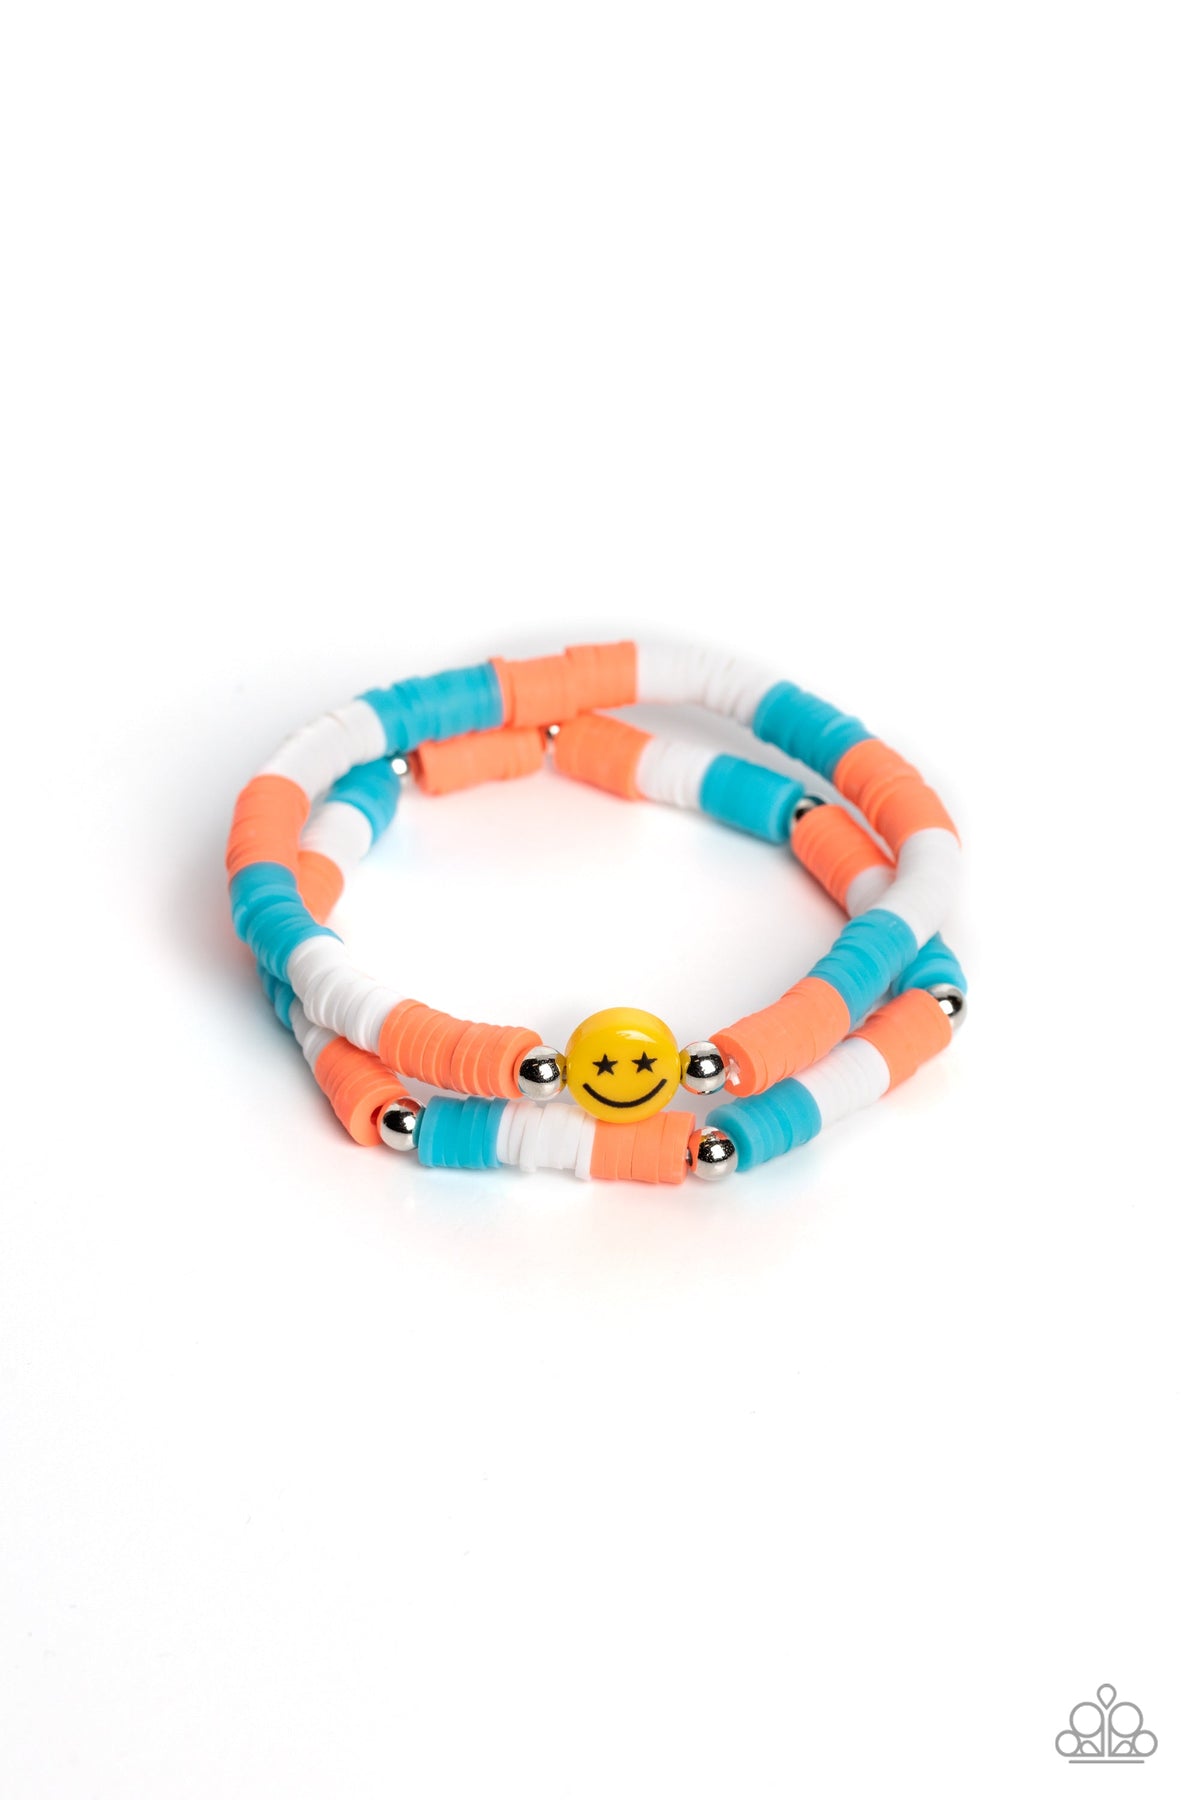 In SMILE Coral Orange Bracelet - Paparazzi Accessories- lightbox - CarasShop.com - $5 Jewelry by Cara Jewels